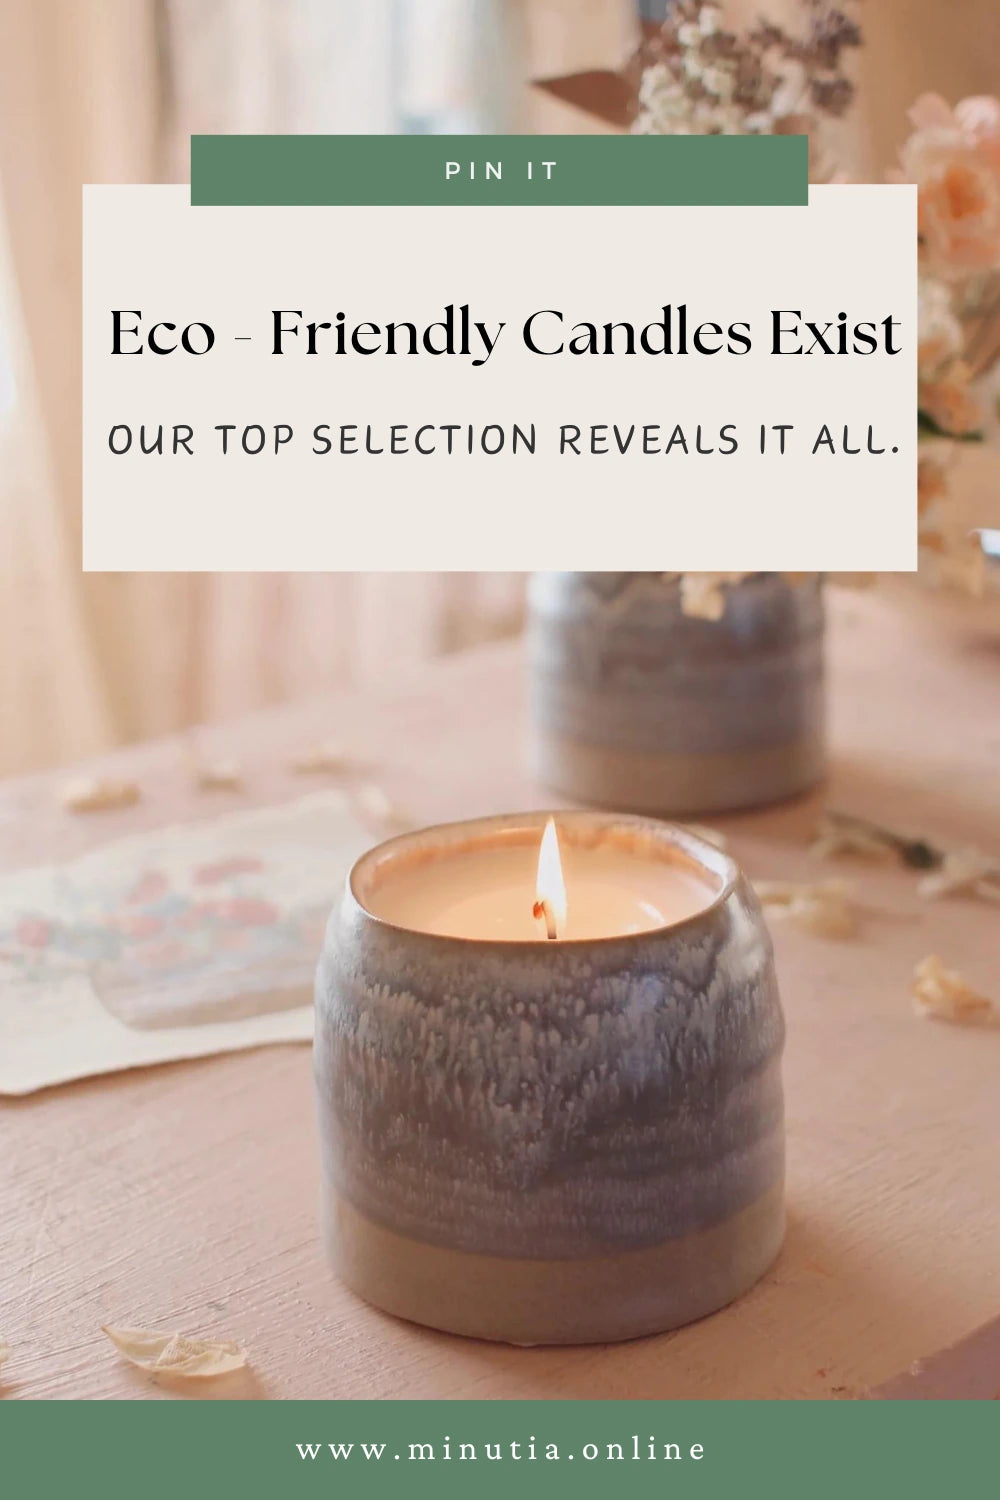 Eco - Friendly Candles Exist: Our Top Selection